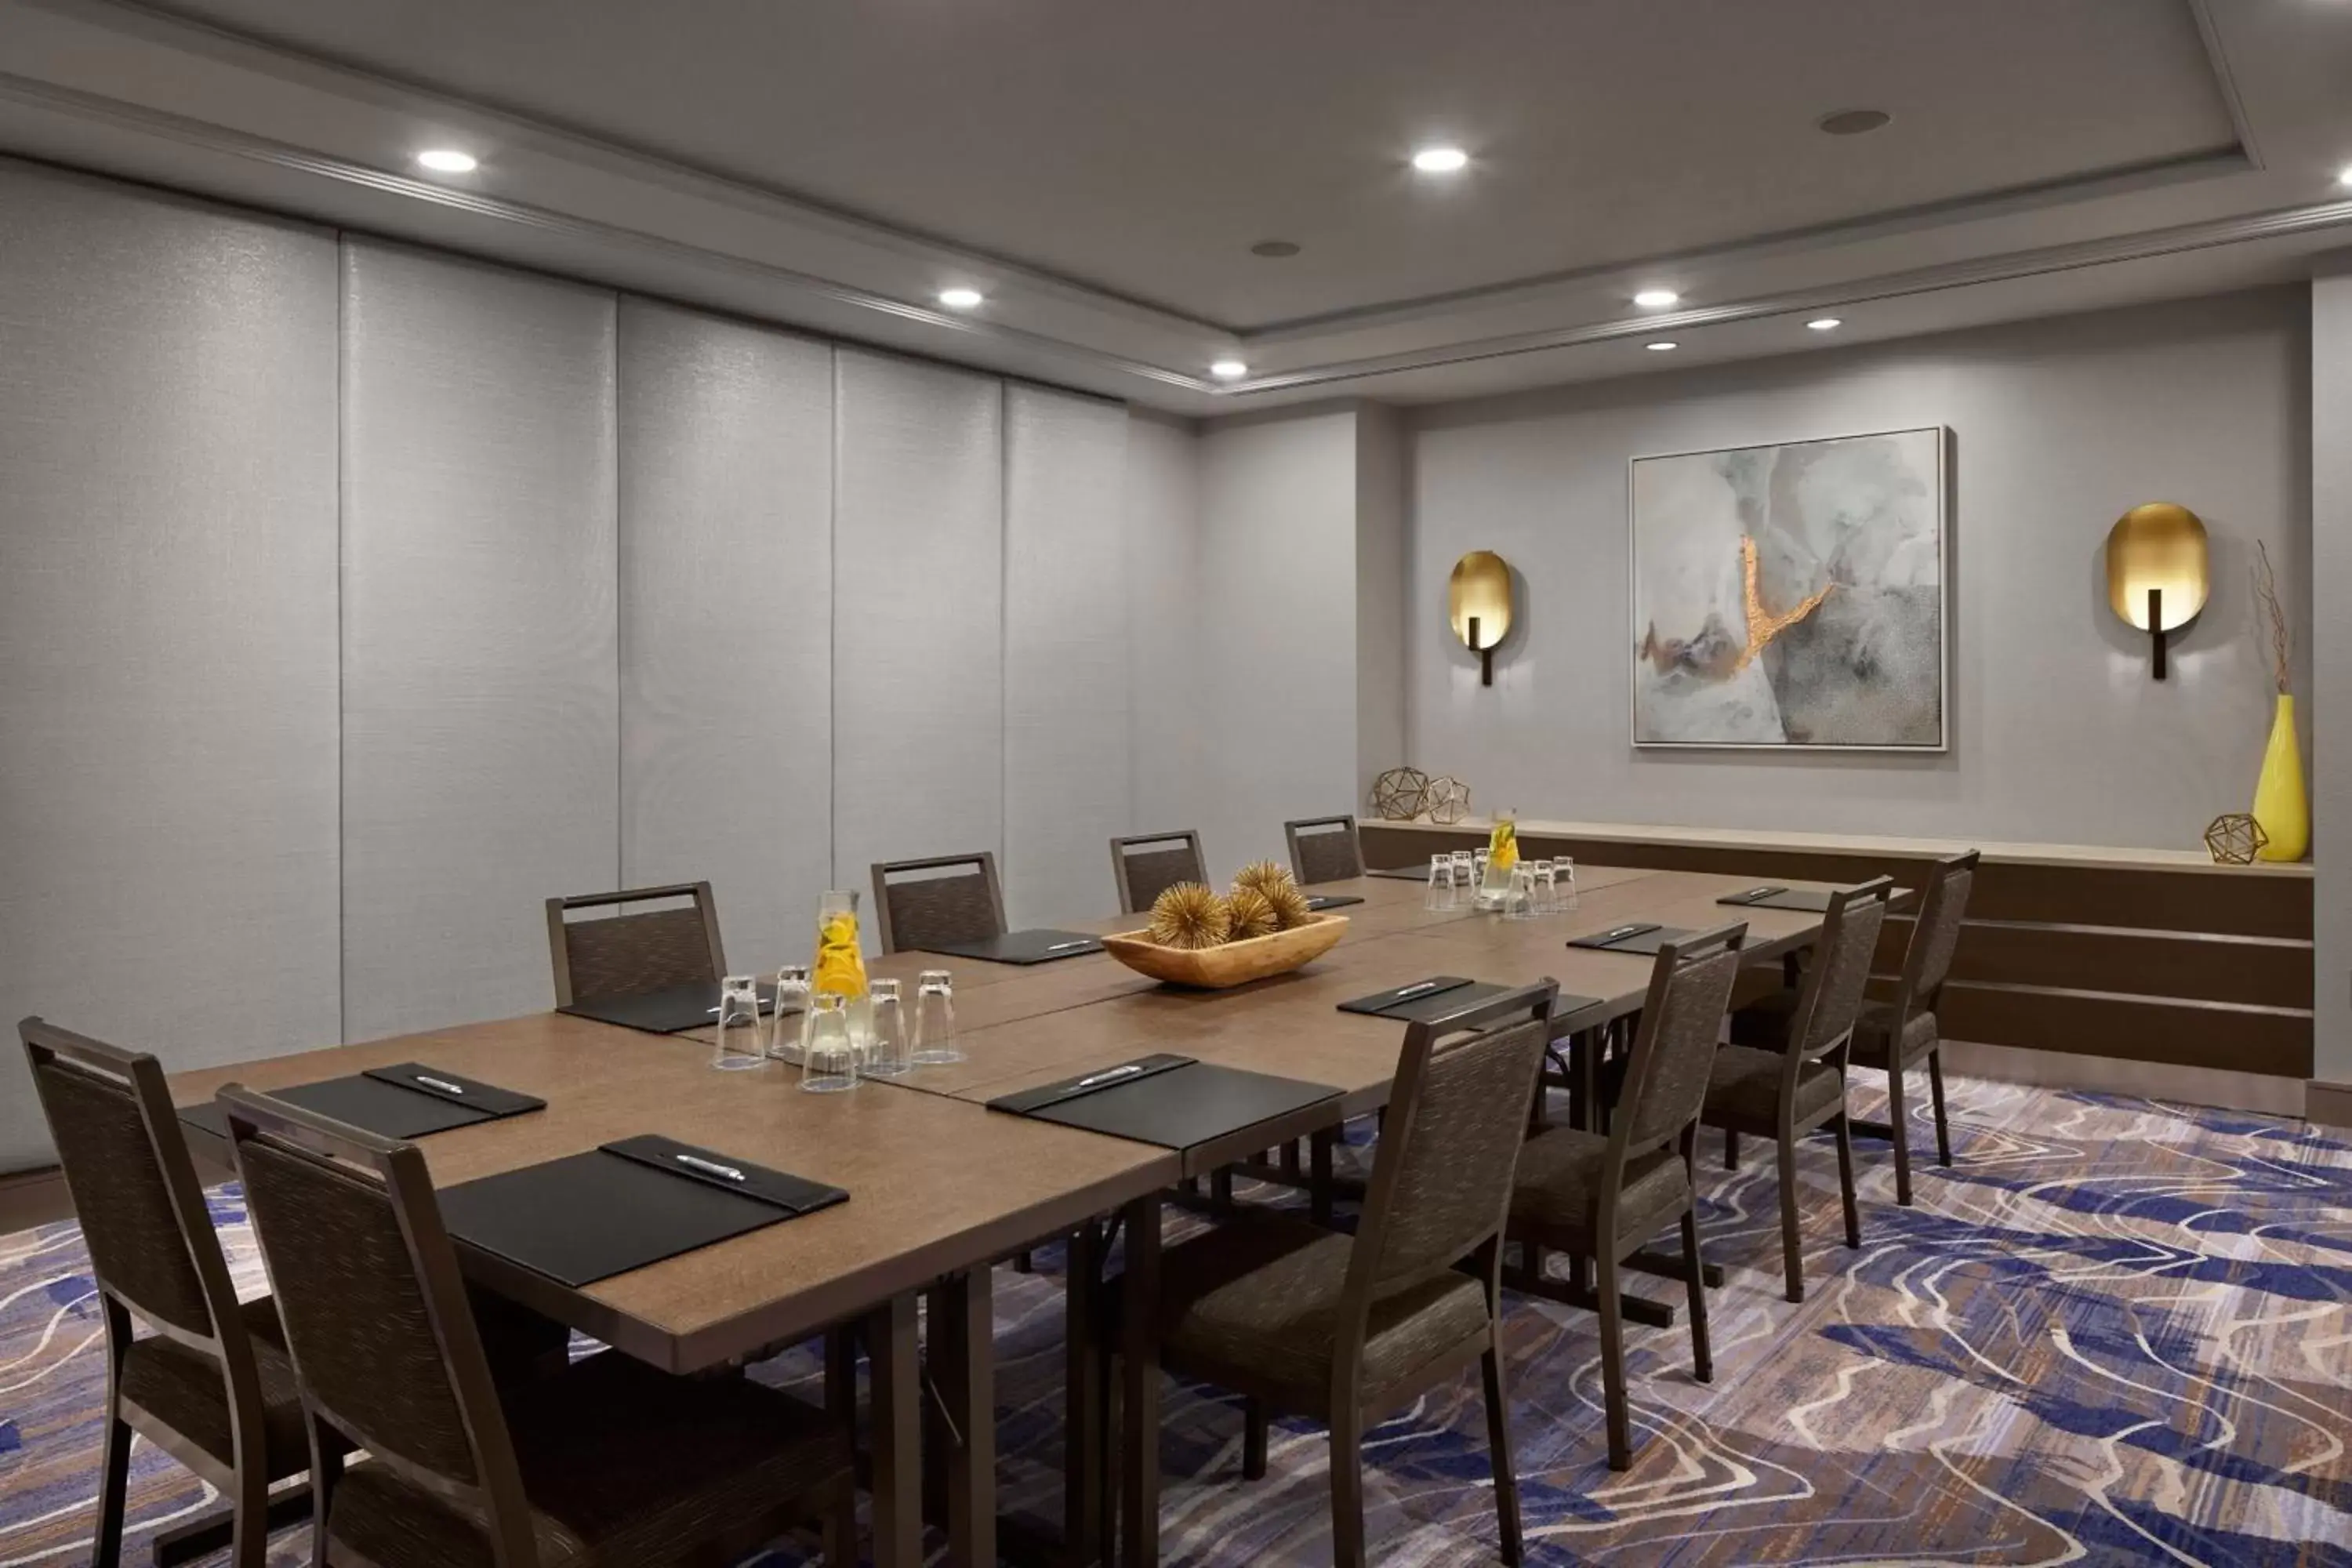 Meeting/conference room in Westin Georgetown, Washington D.C.